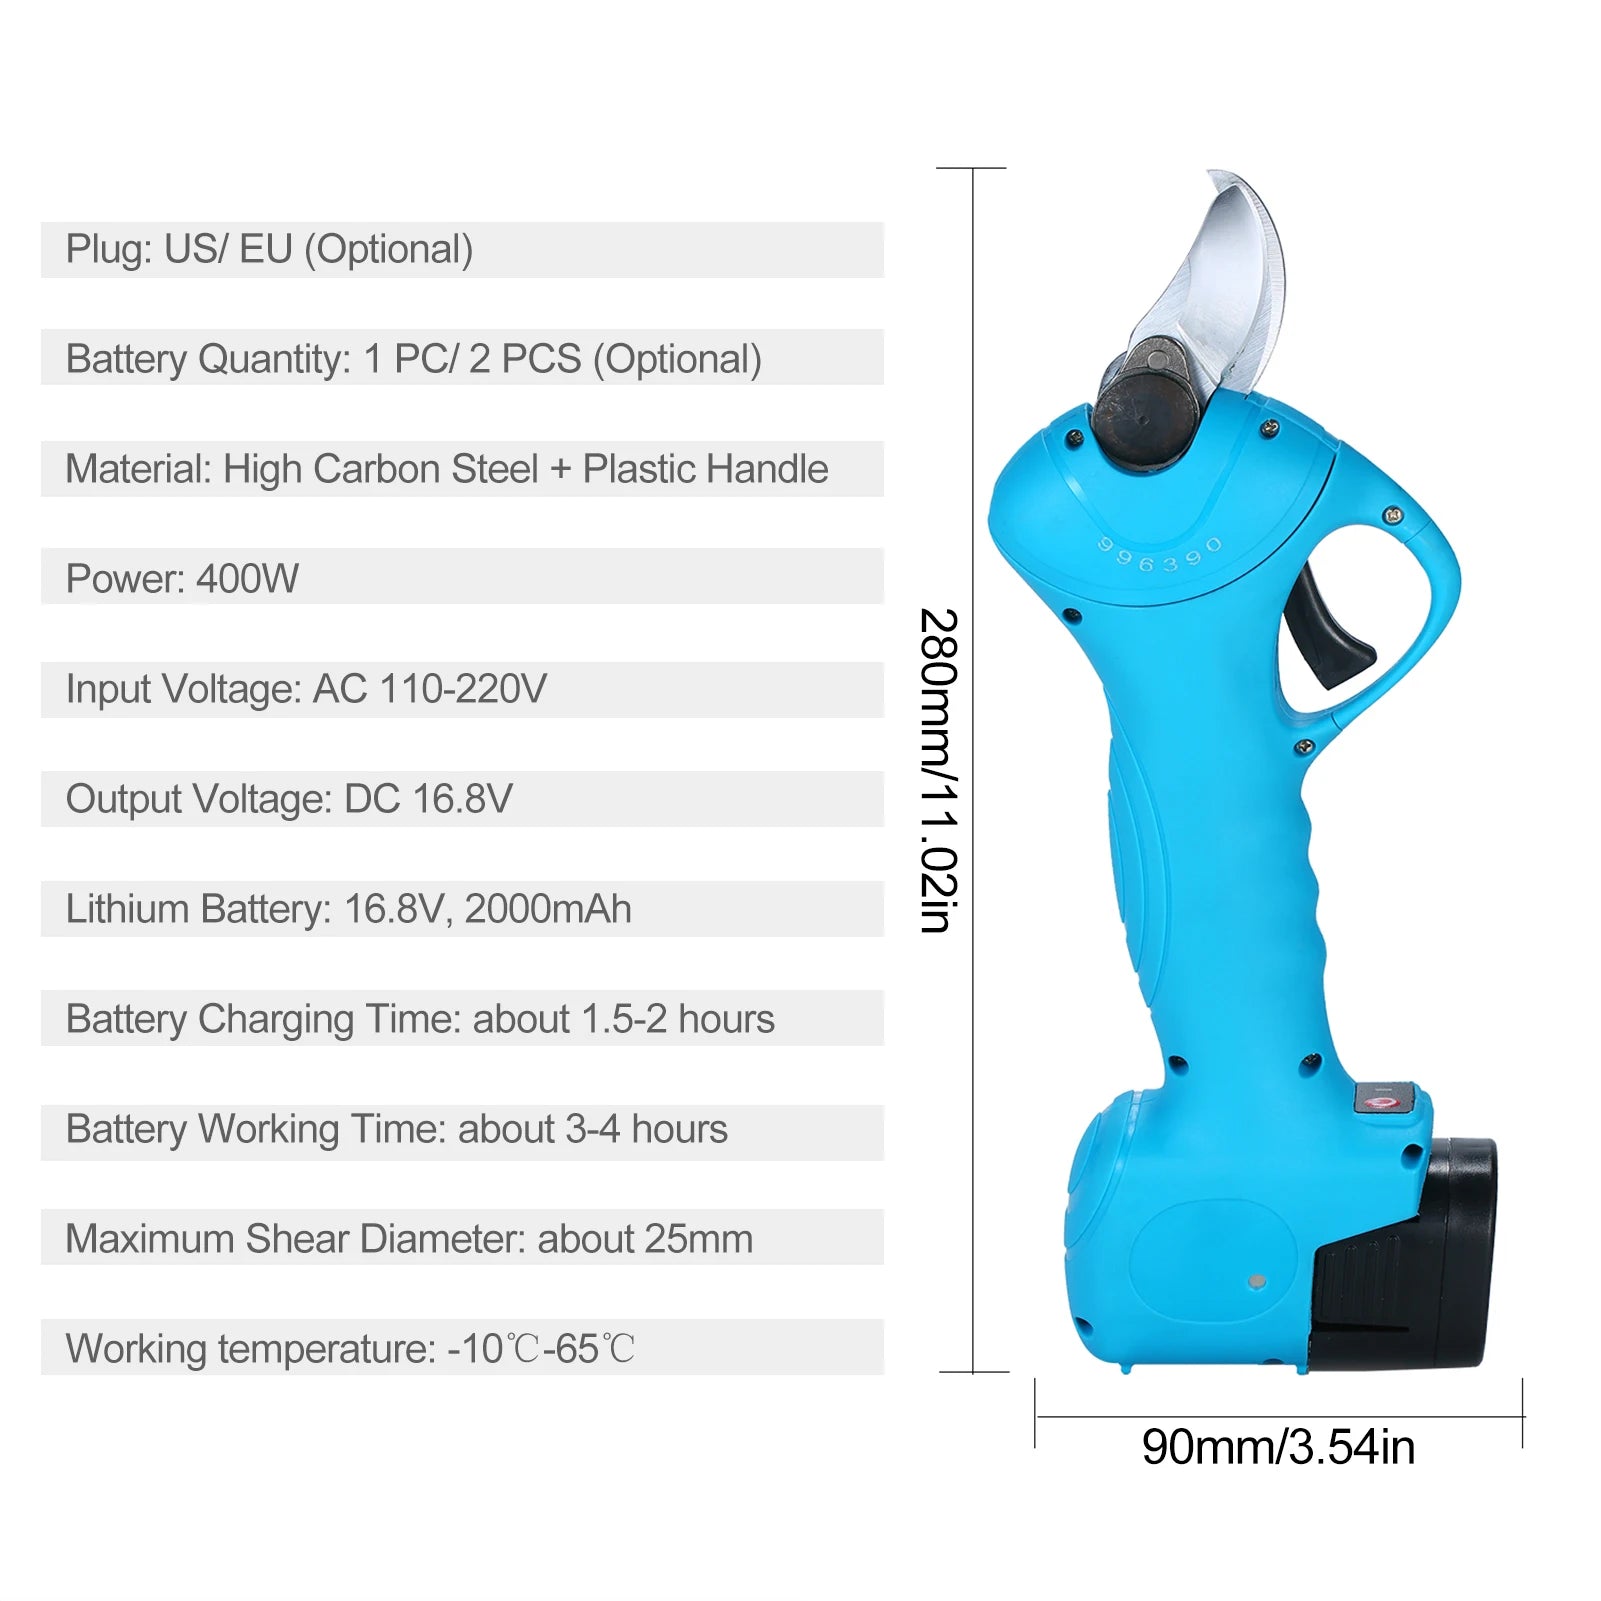 Pruning Shears, Cordless, Rechargeable Lithium Battery